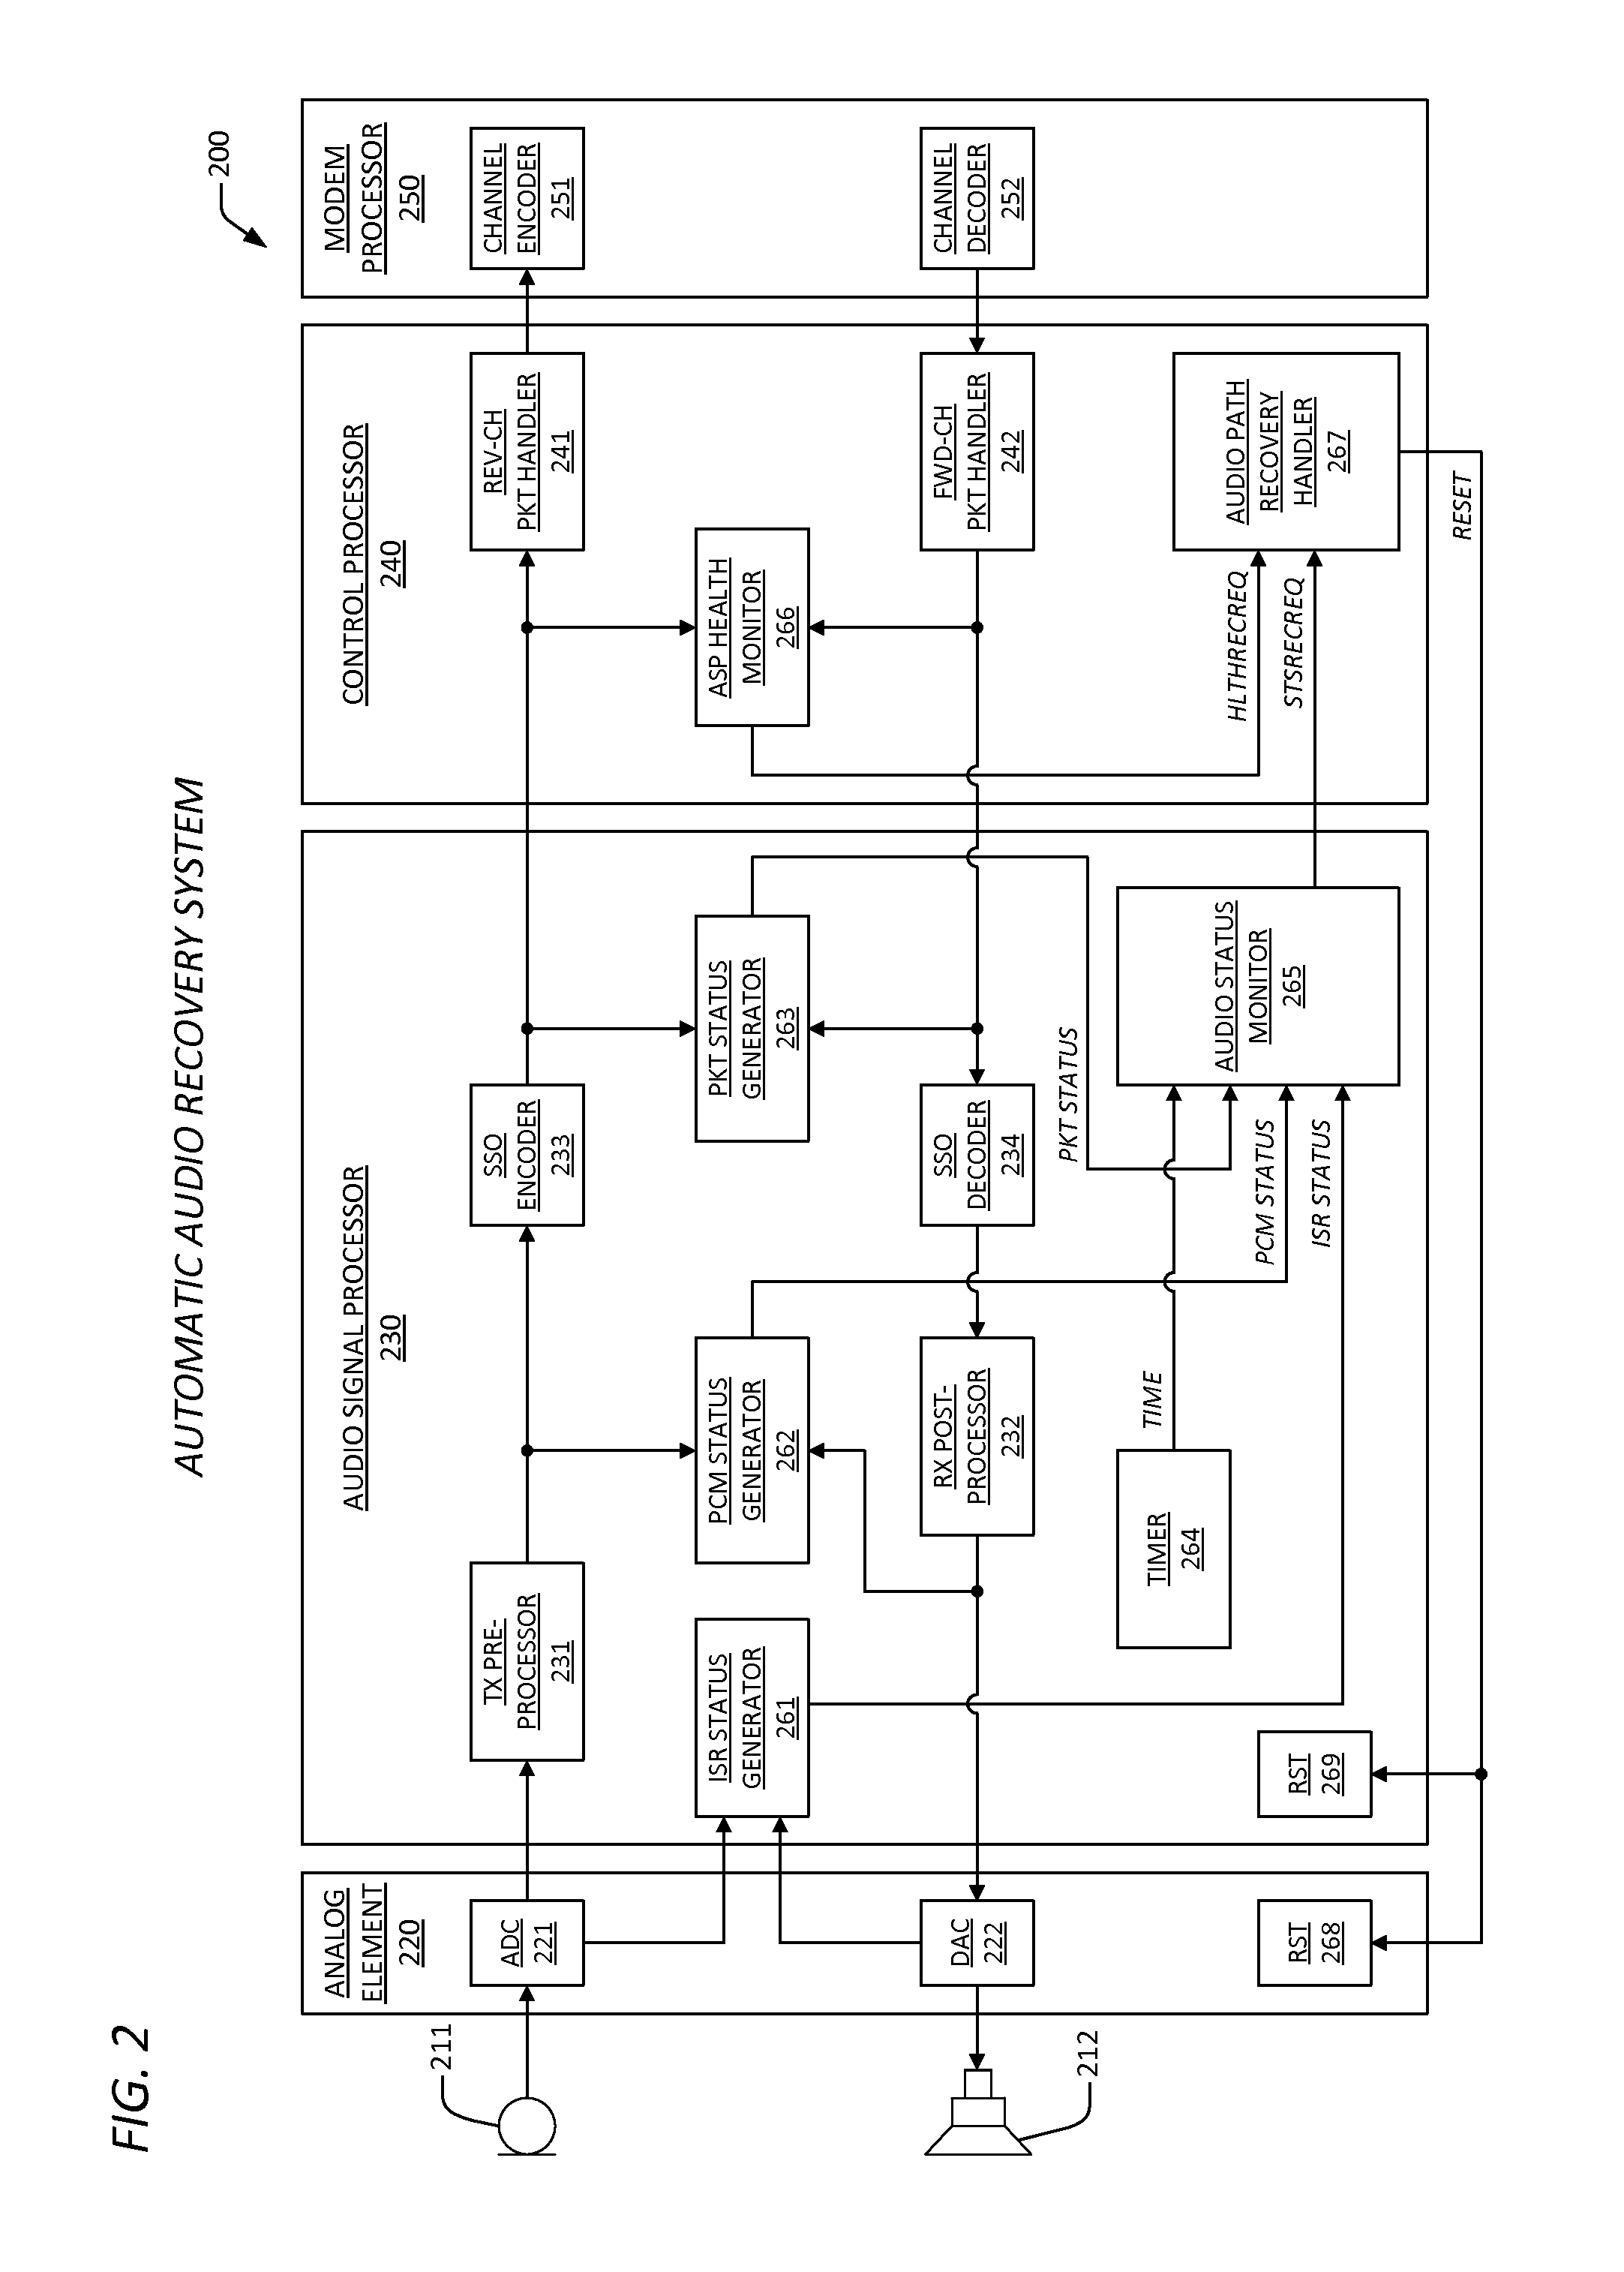 Apparatus and method for automatic audio system and recovery from unexpected behaviors